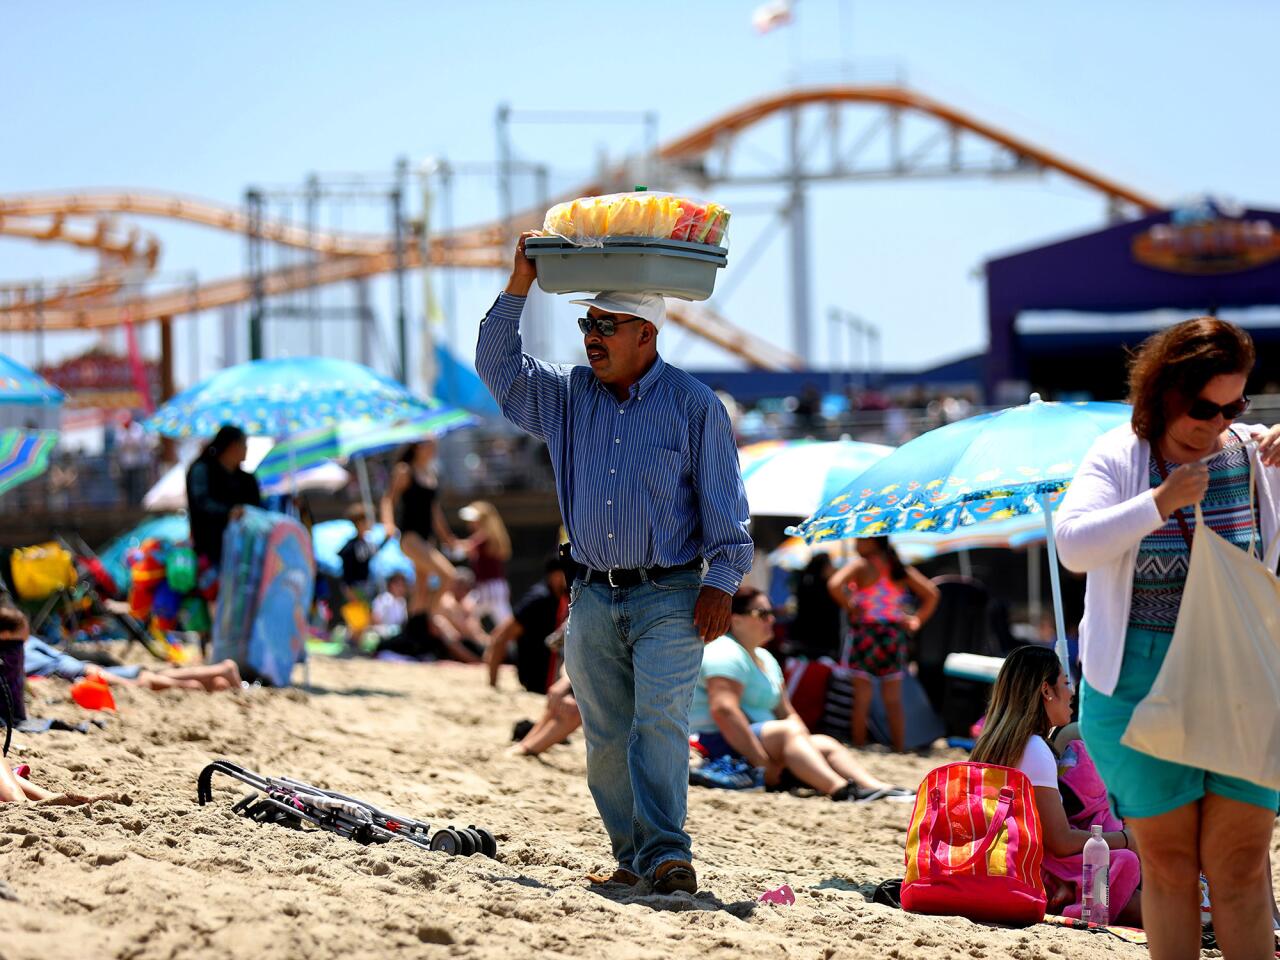 A vendor sells fruit to beachgoers in Santa Monica. Some licensed vendors working around the pier say a new ordinance that can penalize them for blocking access ways has made them nervous about being arrested.